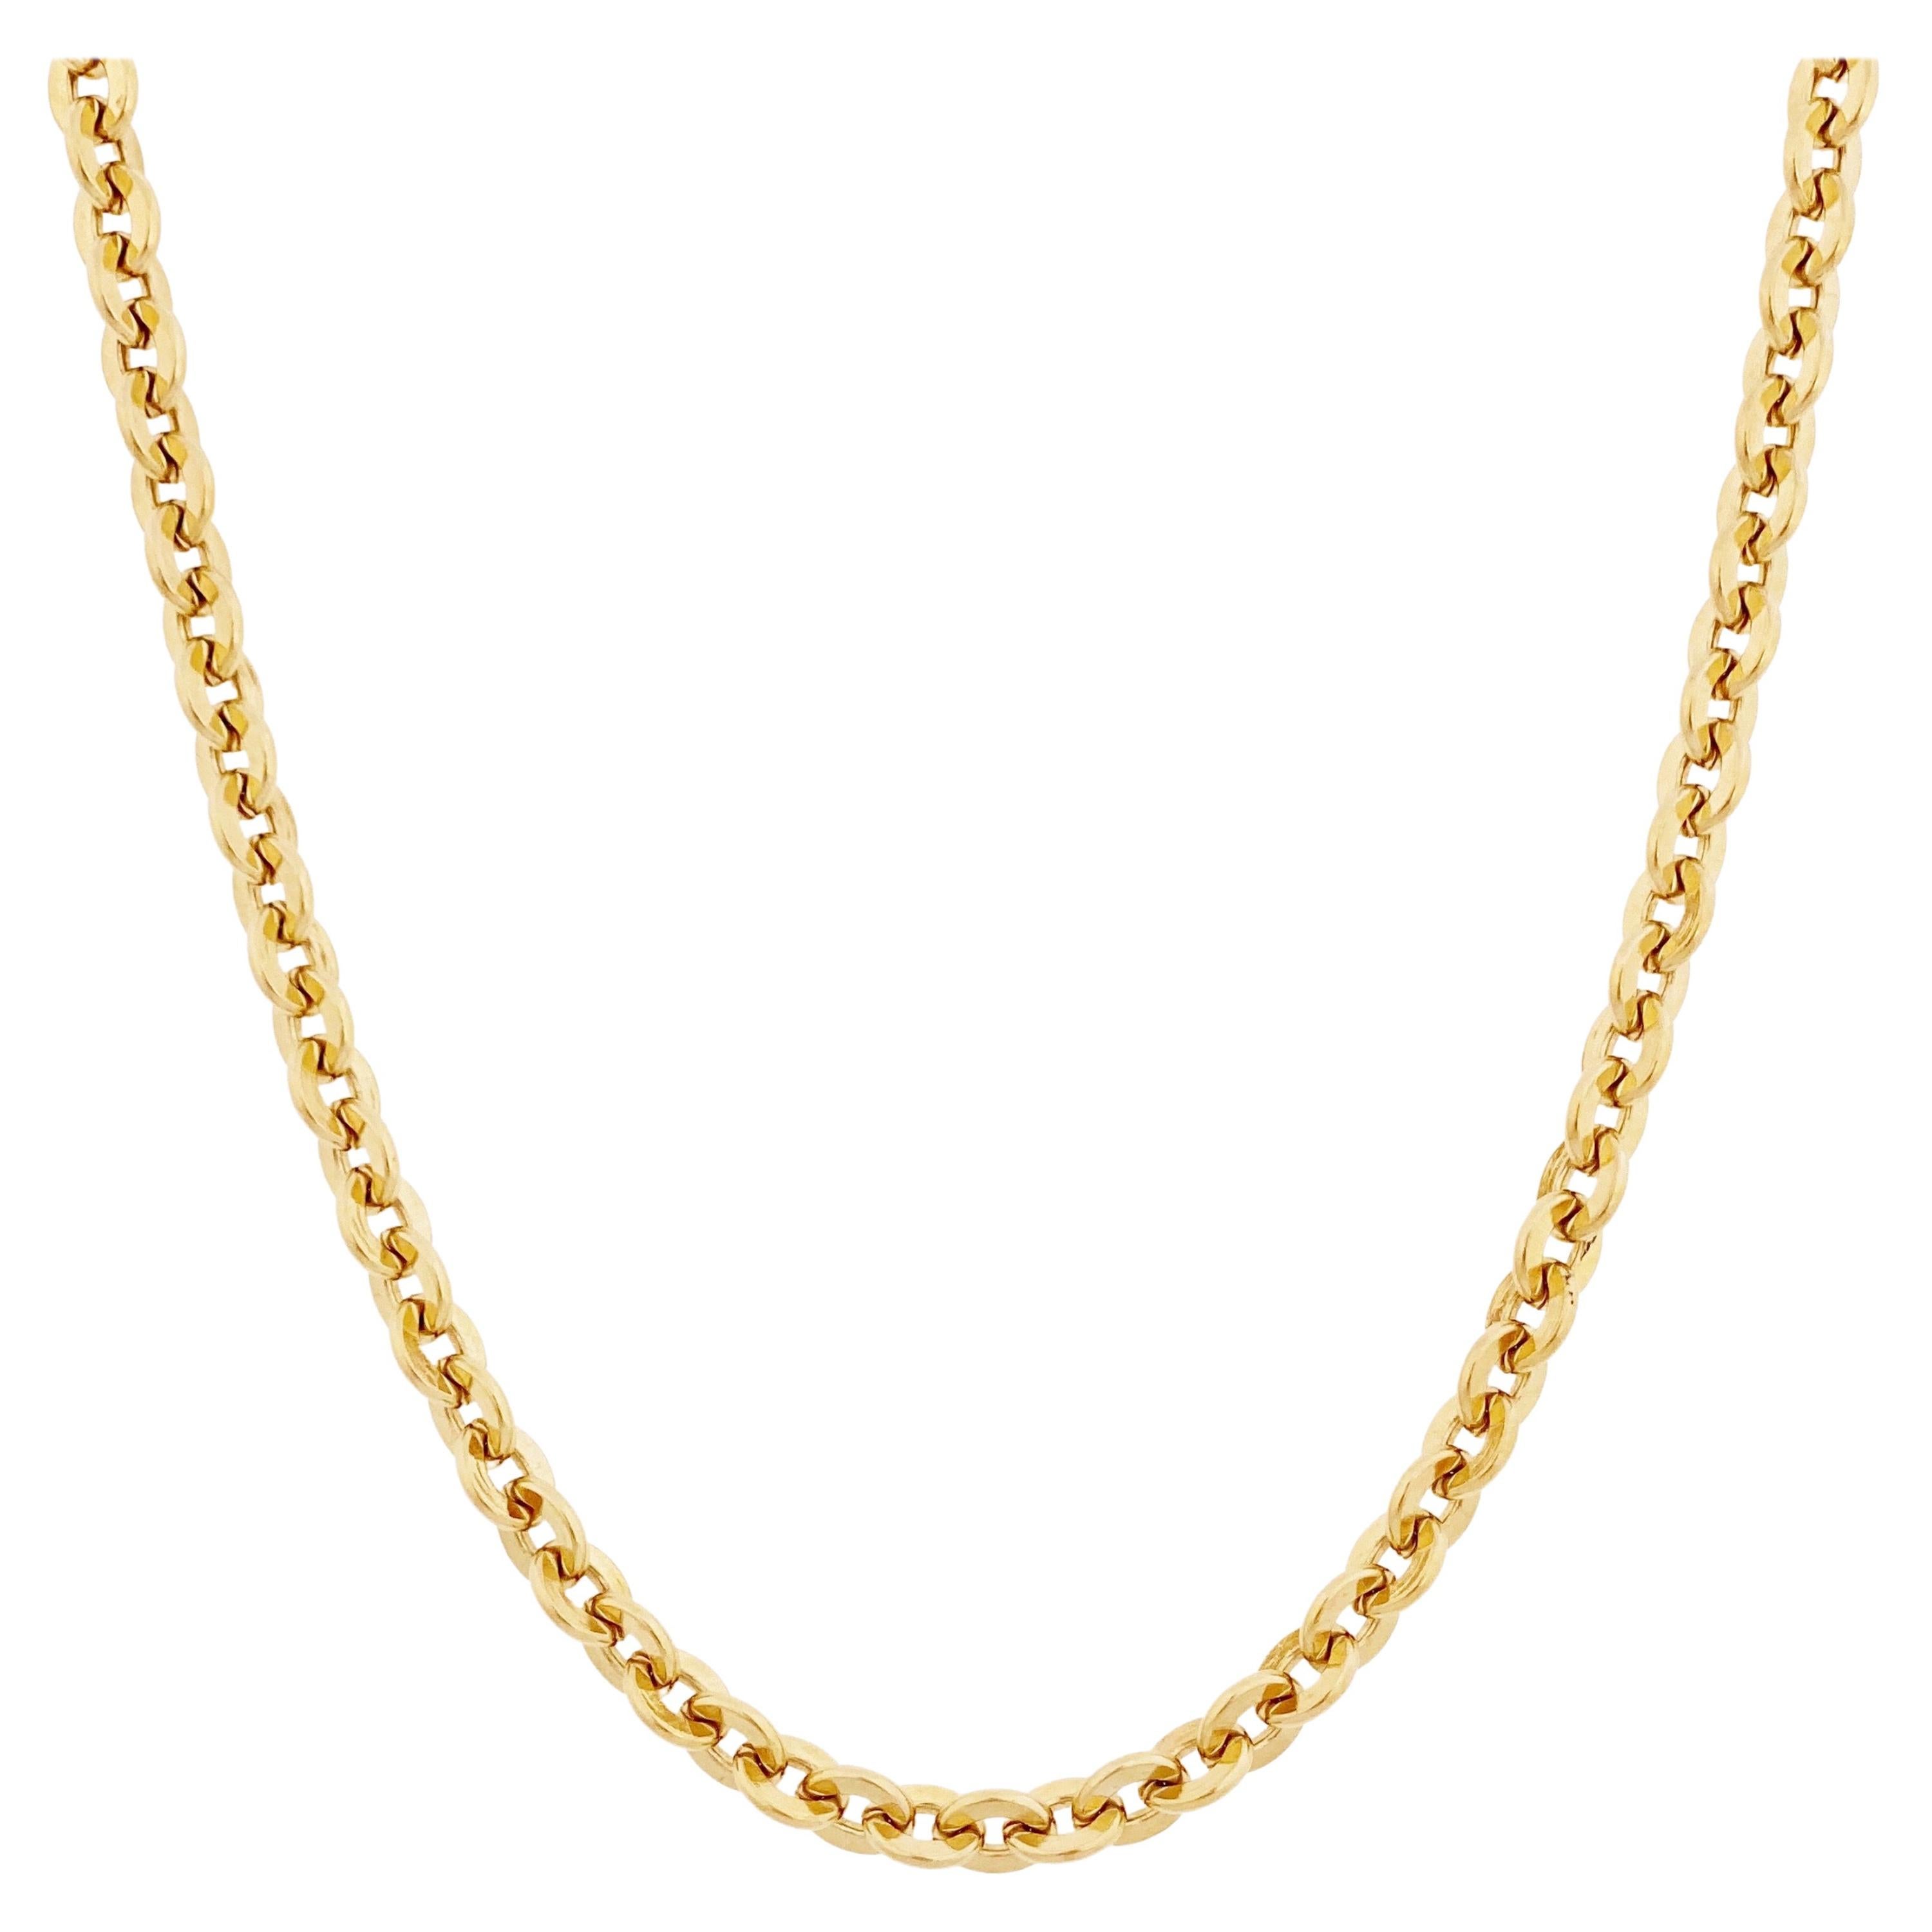 24" Gold Cable Chain Necklace By Givenchy, 1980s